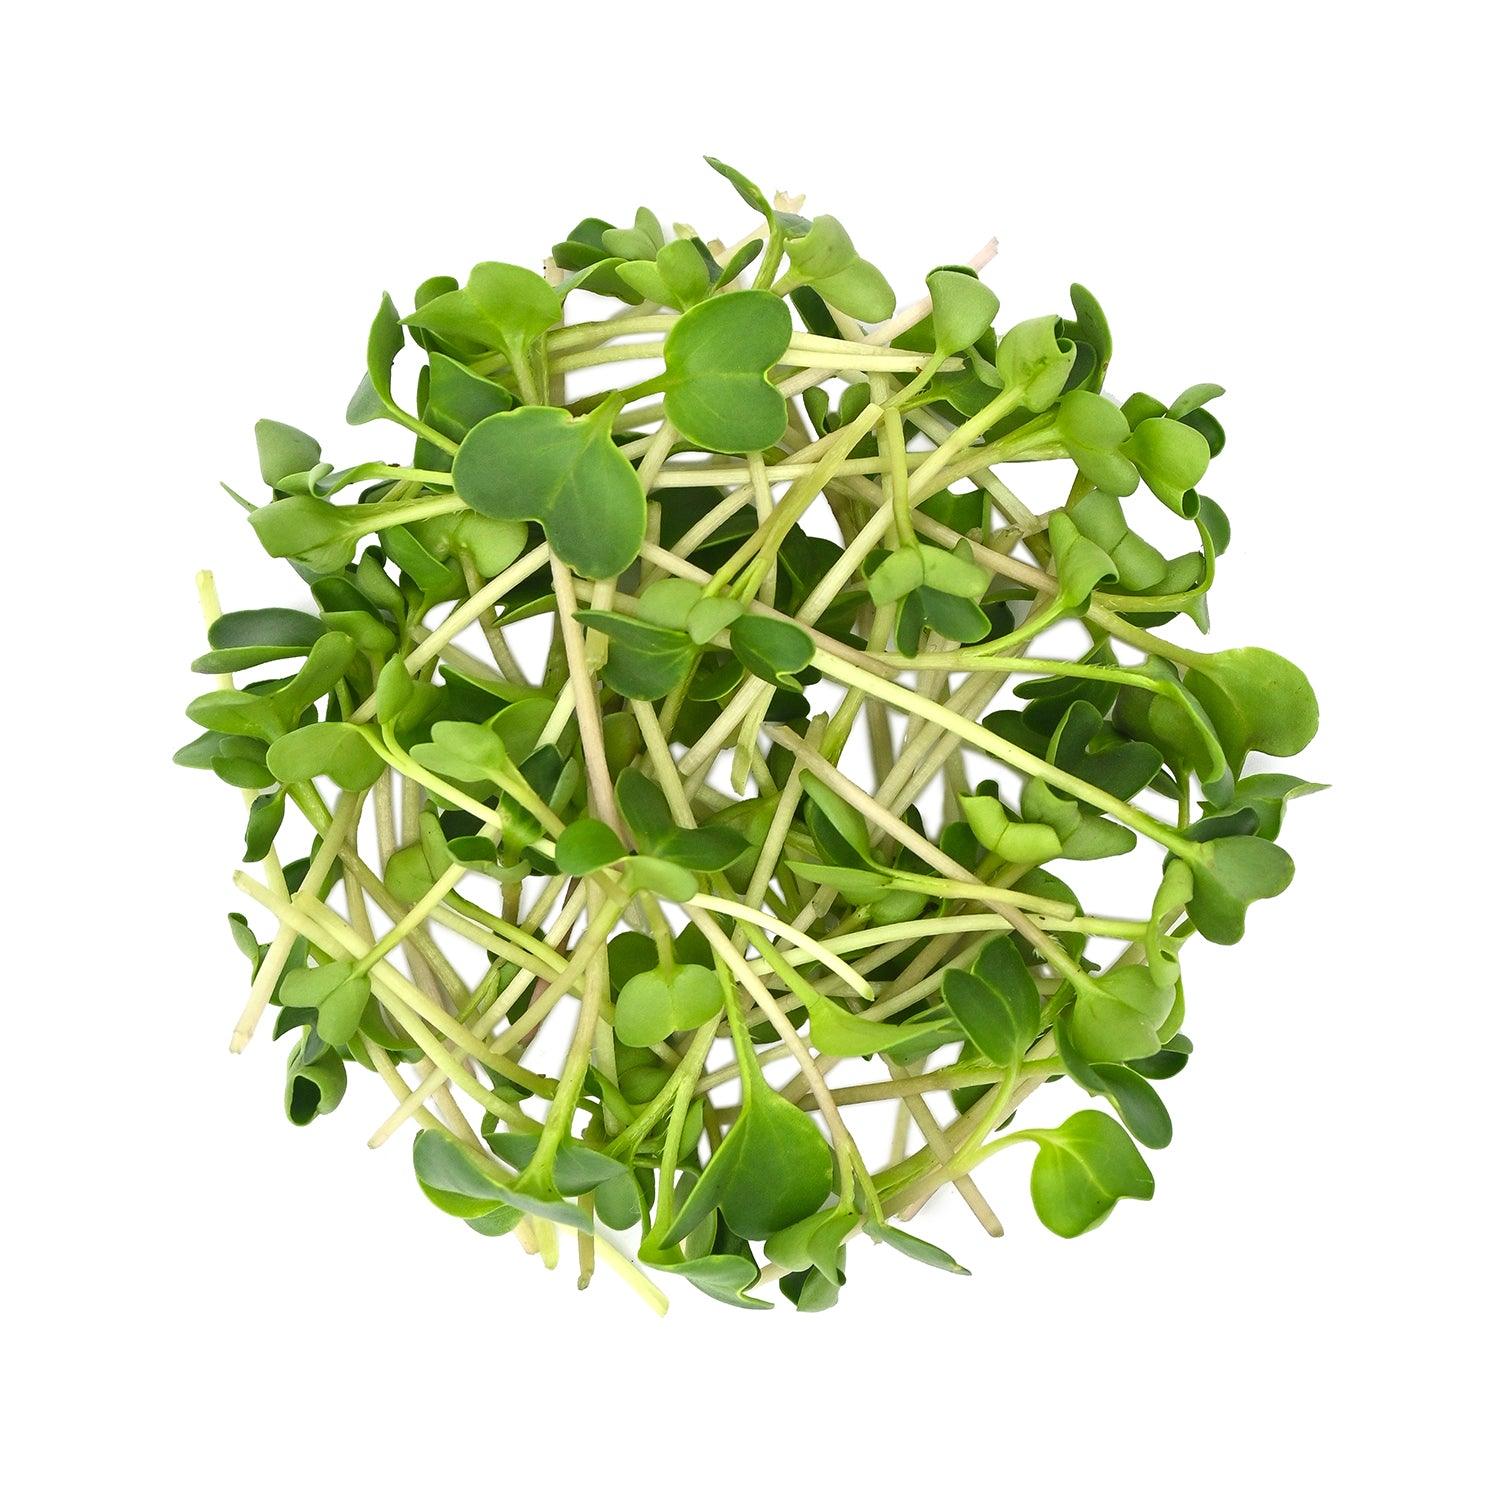 Radish Seeds for Growing Sprouts & Microgreens 200g | Open-Pollinated Vegetable Sprouting Seeds for Kitchen Garden - Satopradhan